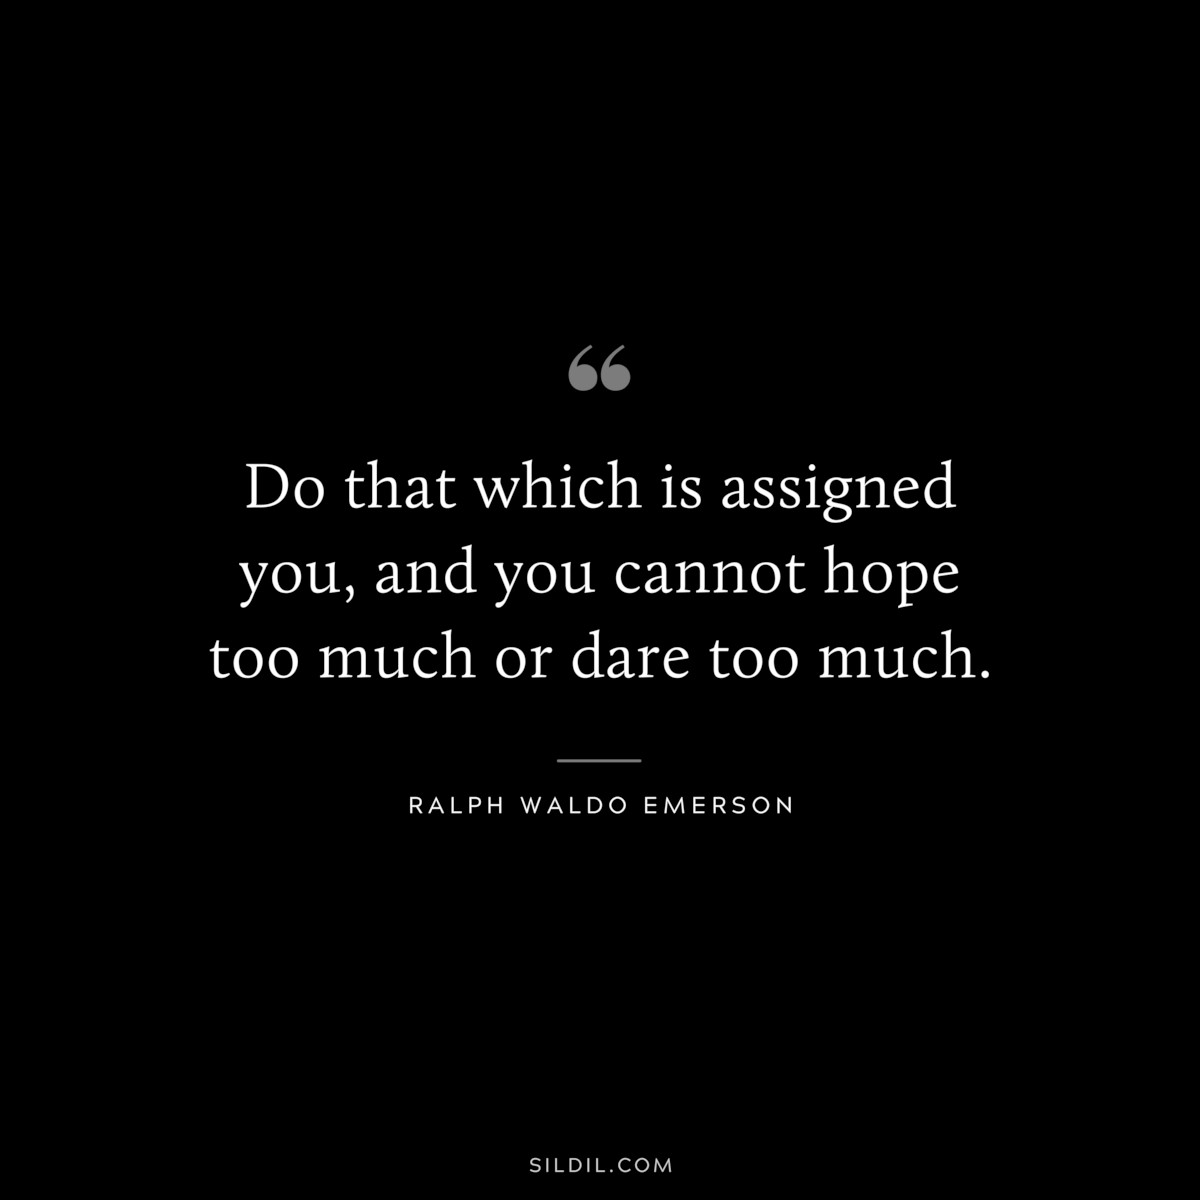 Do that which is assigned you, and you cannot hope too much or dare too much. — Ralph Waldo Emerson